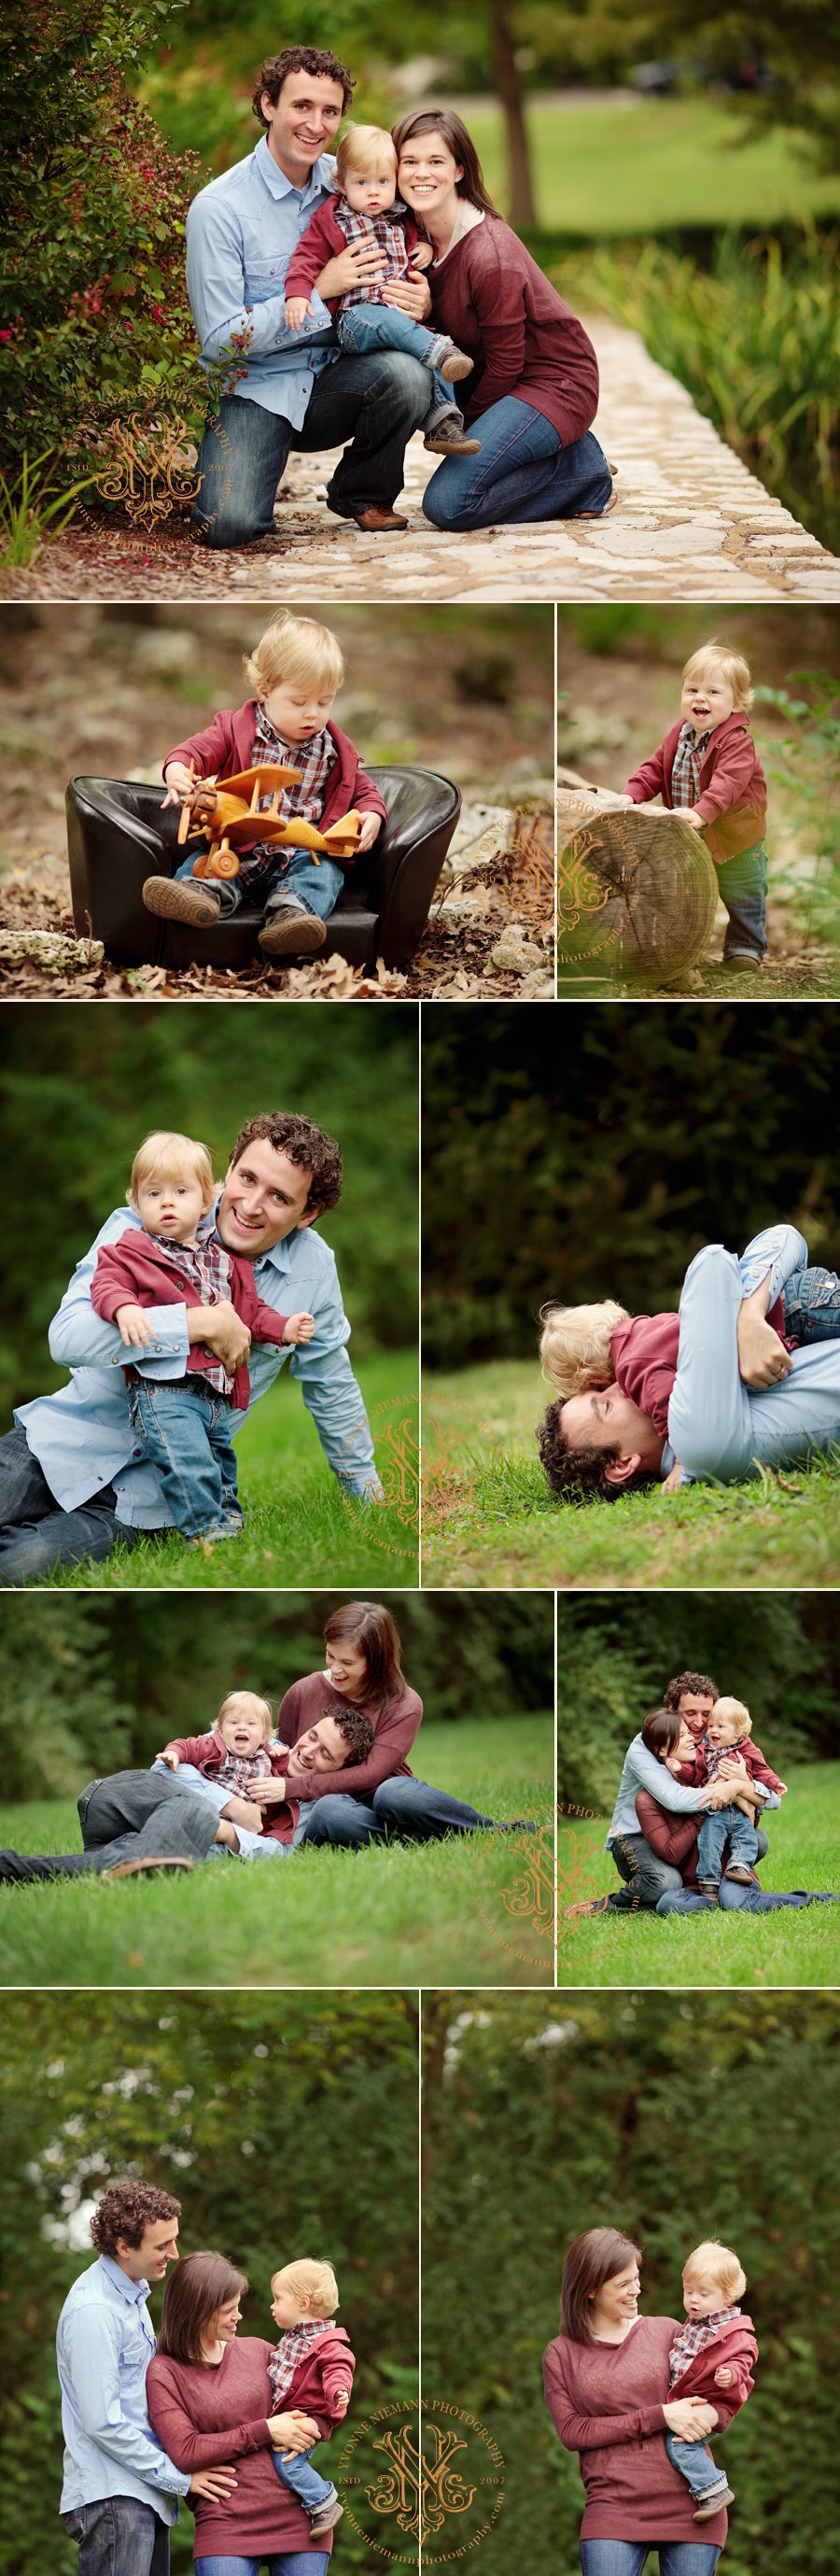 Natural family portraits in St. Louis by Yvonne Niemann Photography.